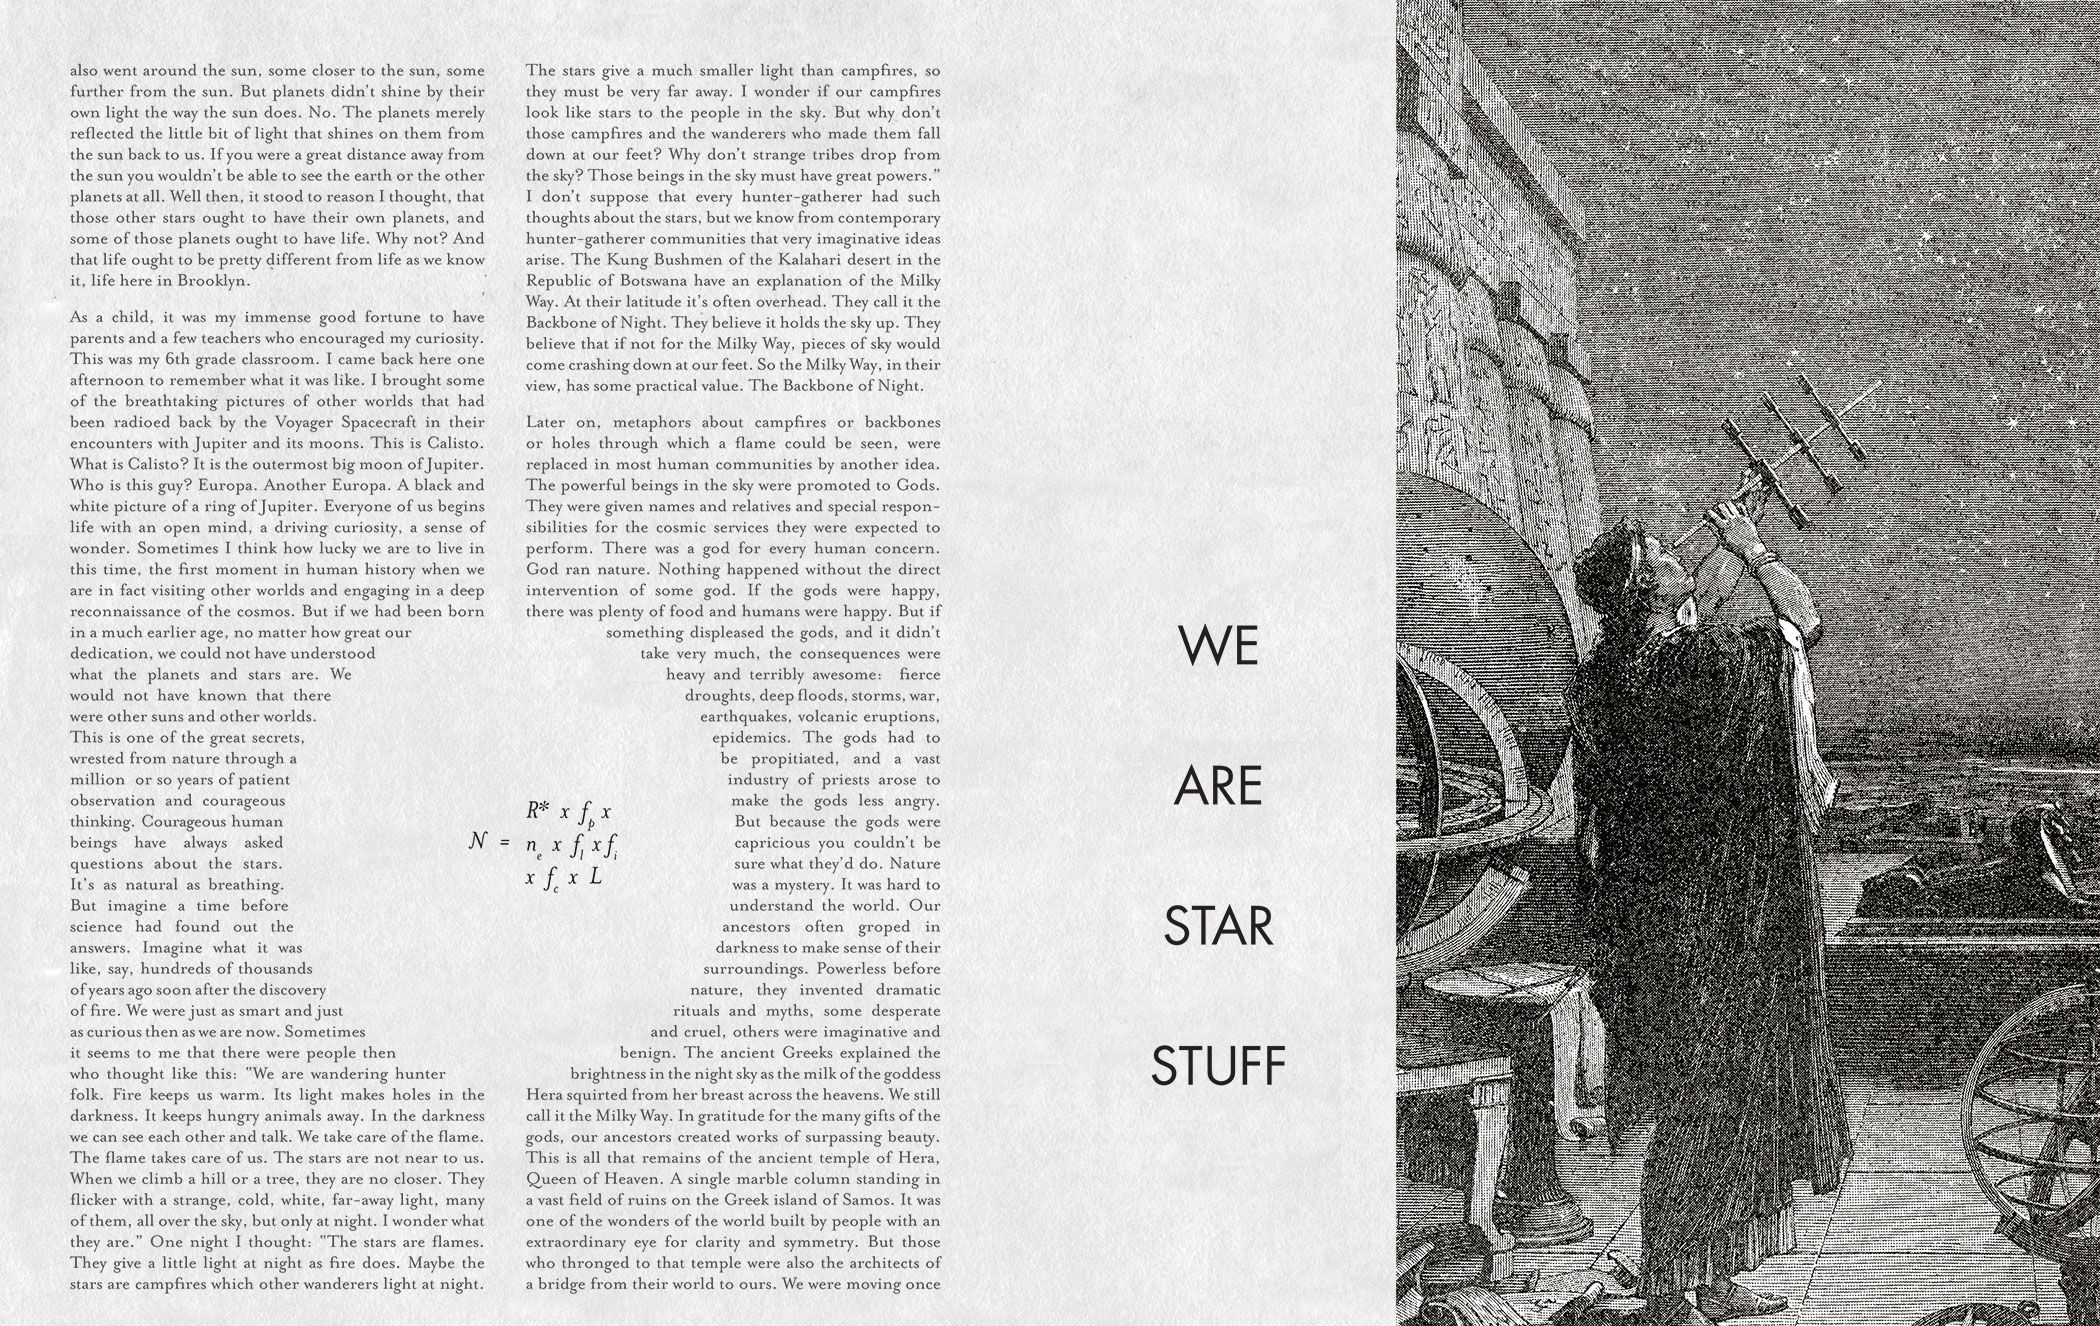 An editorial spread with images, text and a prominent pullquote that says We Are Star Stuff